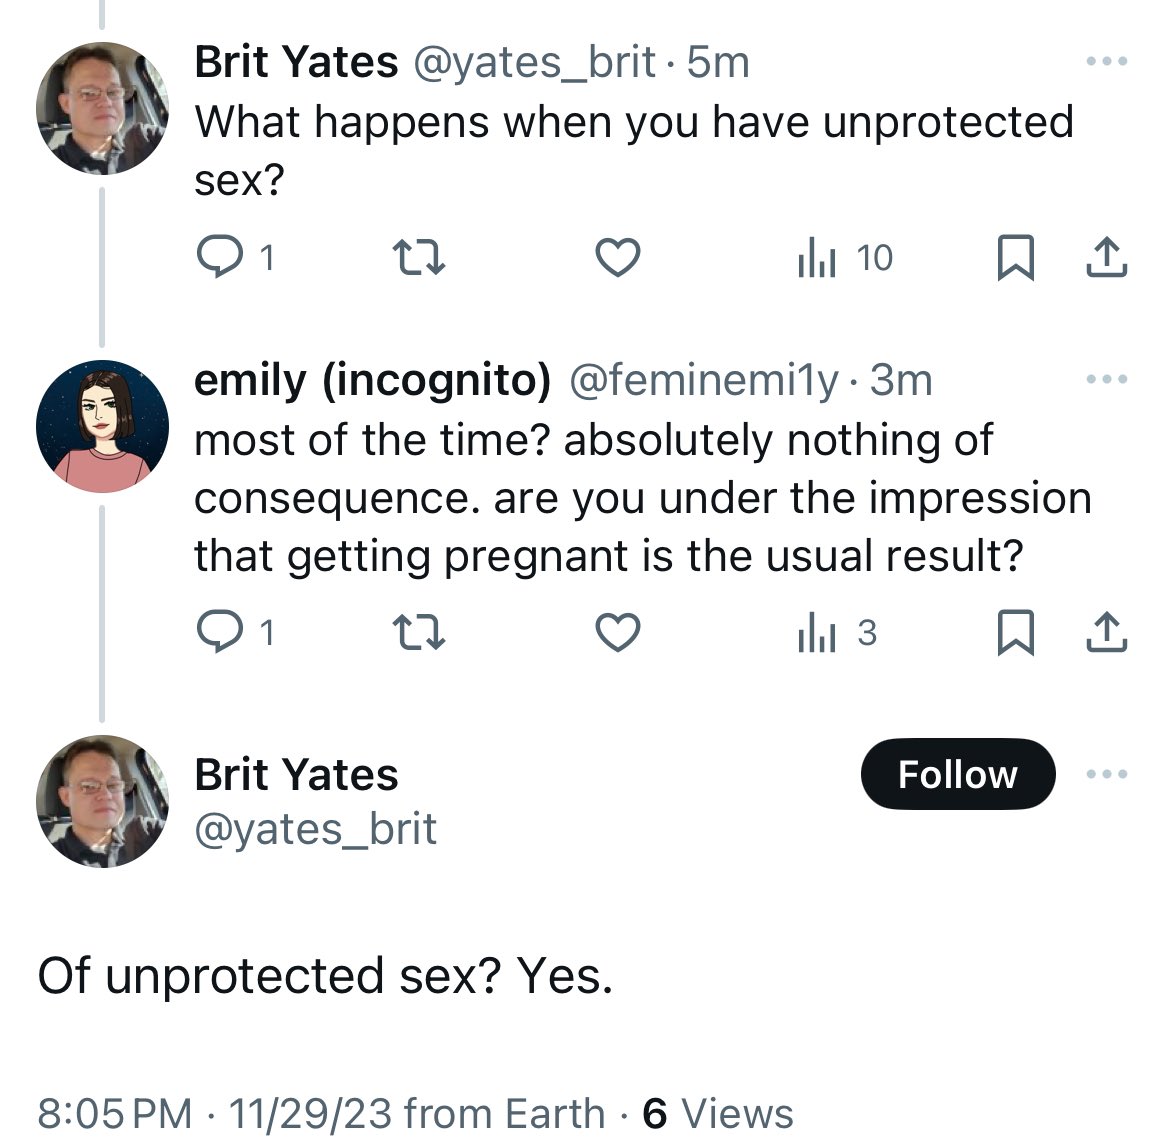 and on this episode of 'pro life men having absolutely no idea how reproduction actually occurs'